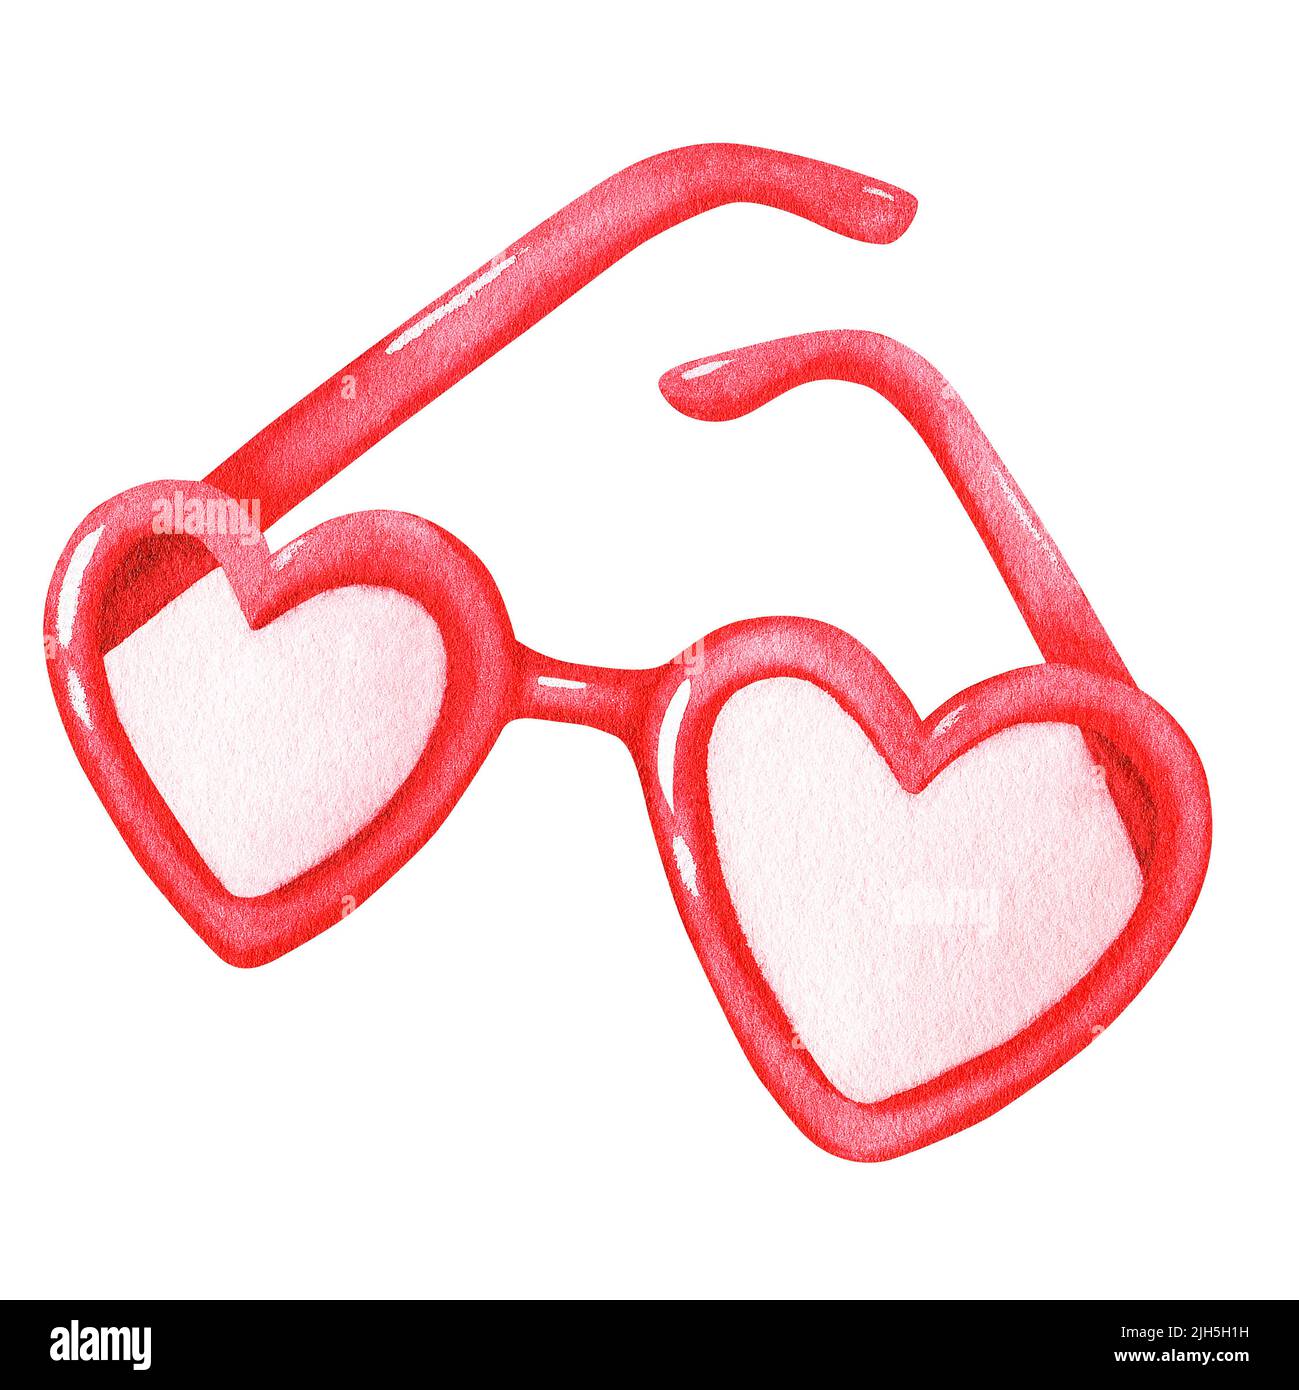 Sunglasses in the shape of a heart. Watercolor illustration. Isolated on a white background. For your design stickers, sunscreen products, cosmetics. Stock Photo